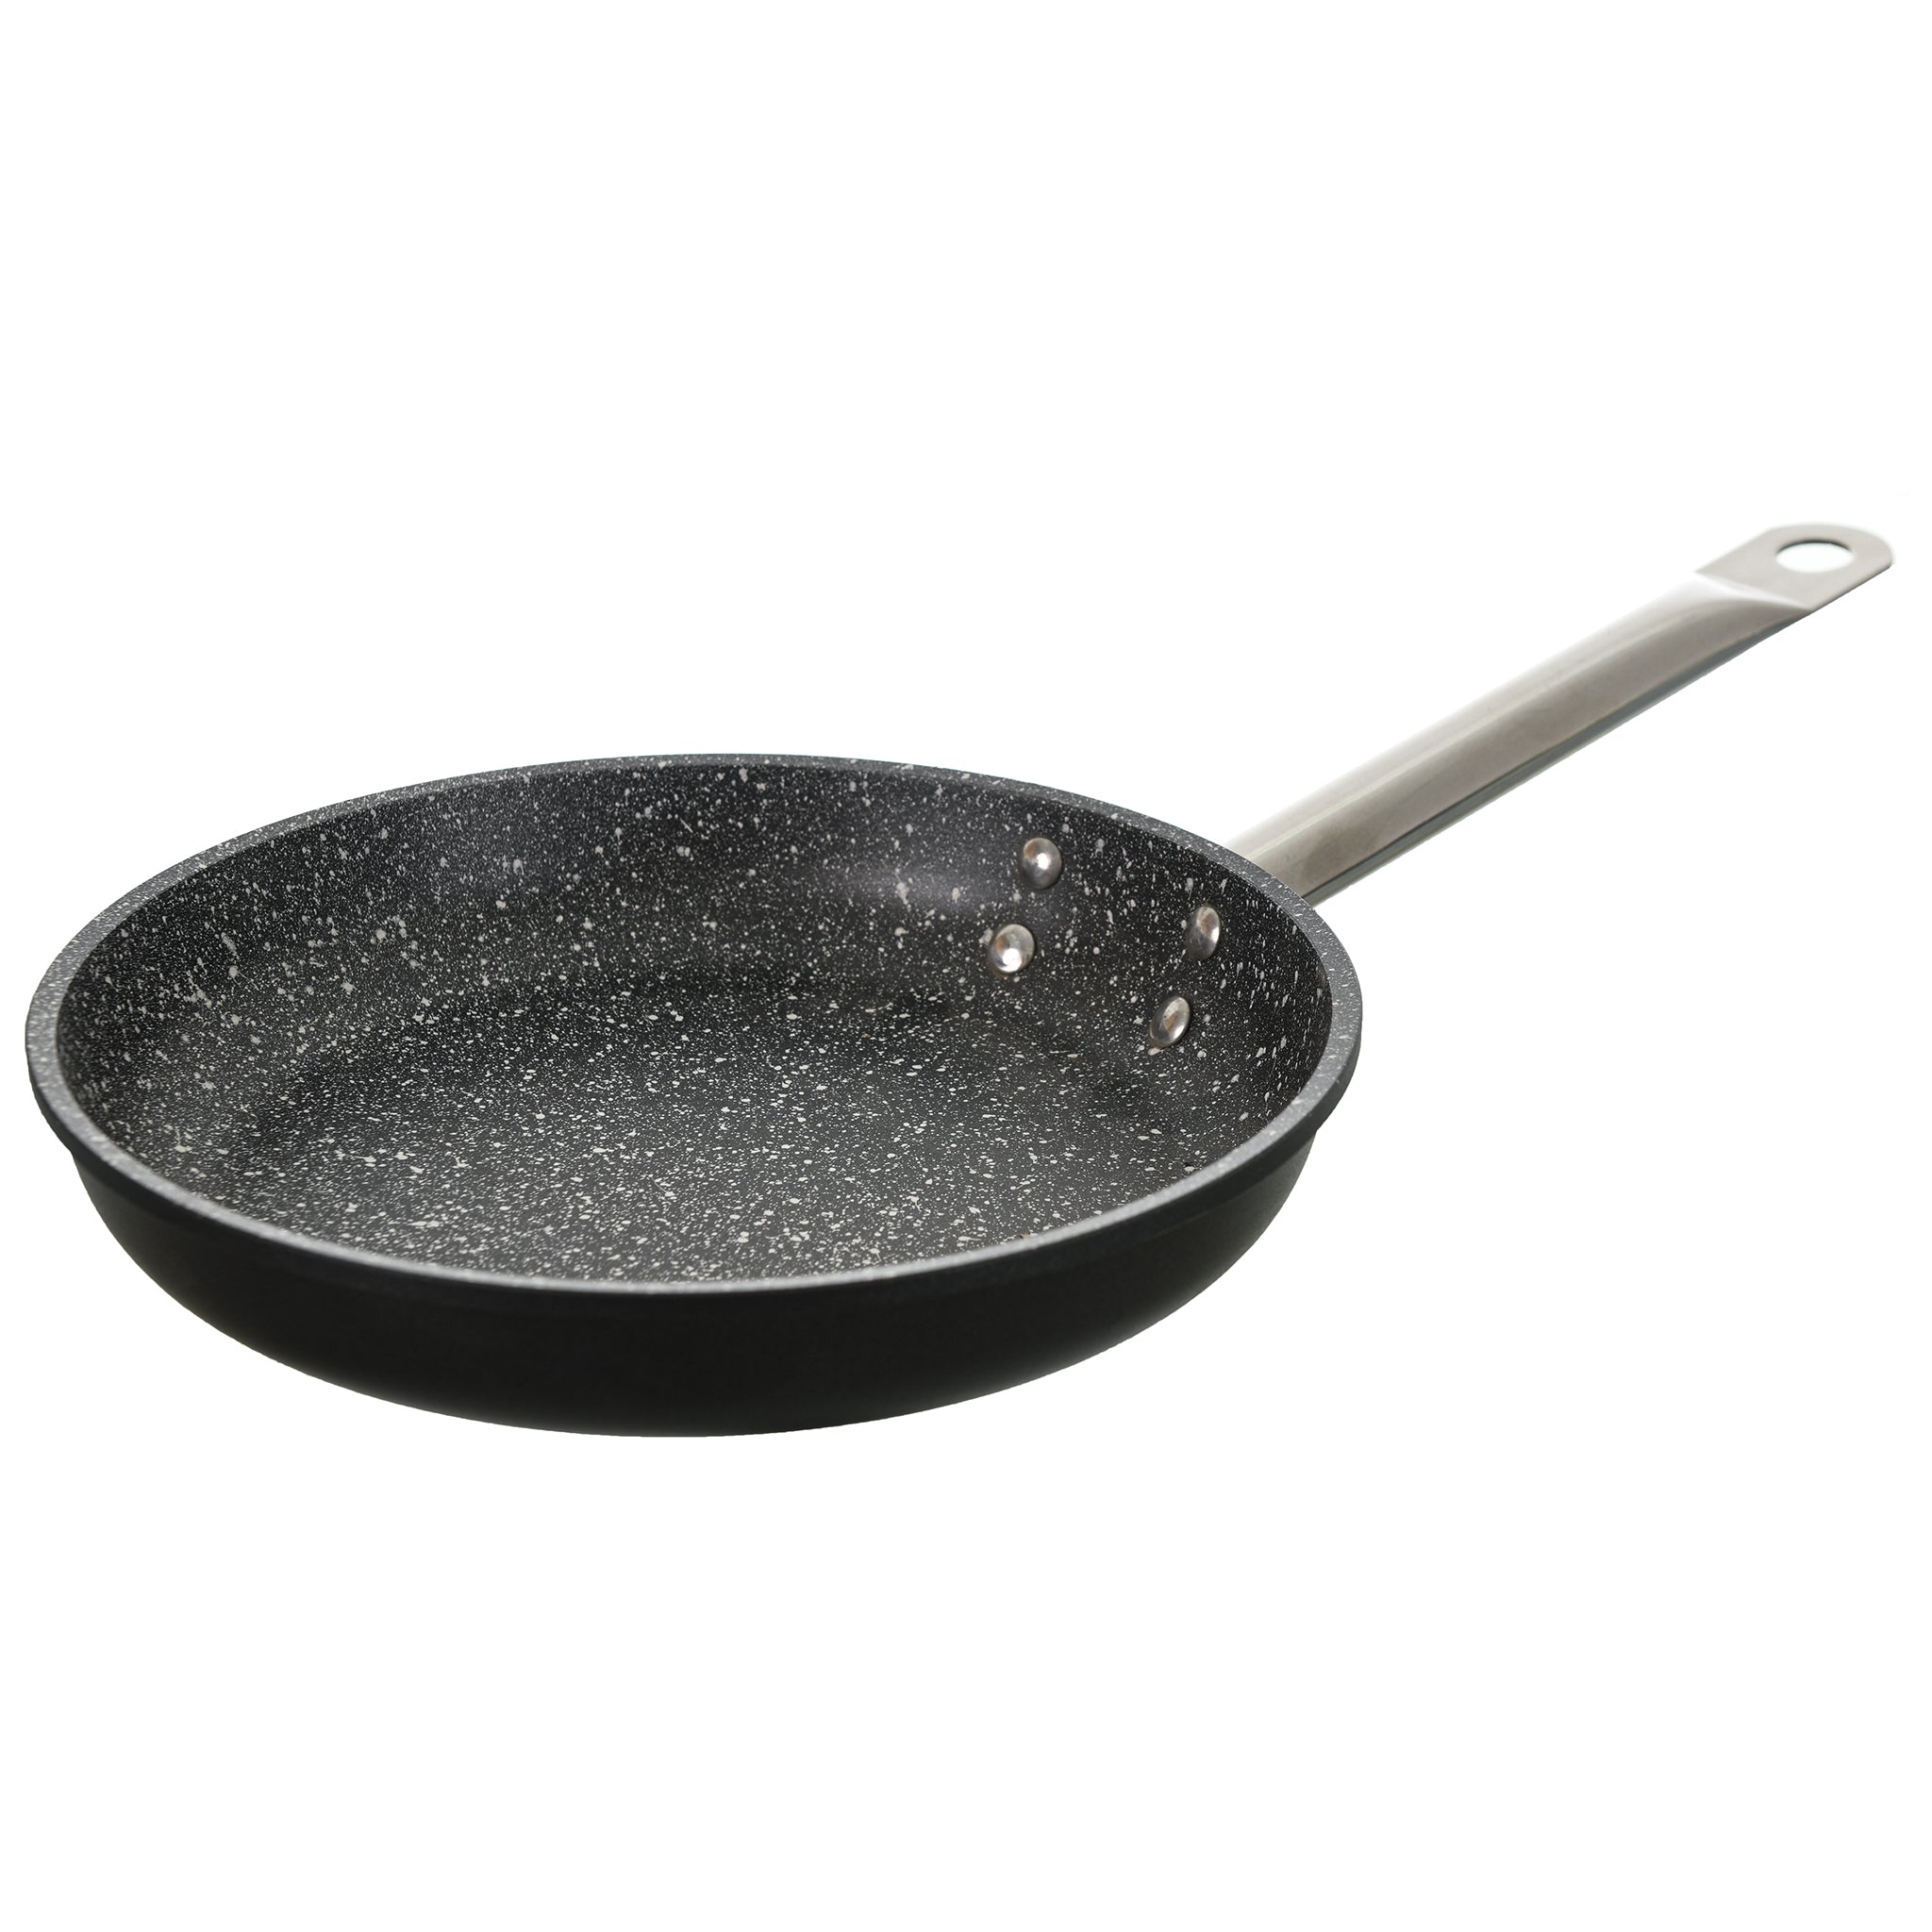 Risoli - Frypan with Stainless Steel Handle - Black - Die Cast Aluminum - 24cm - 44000410